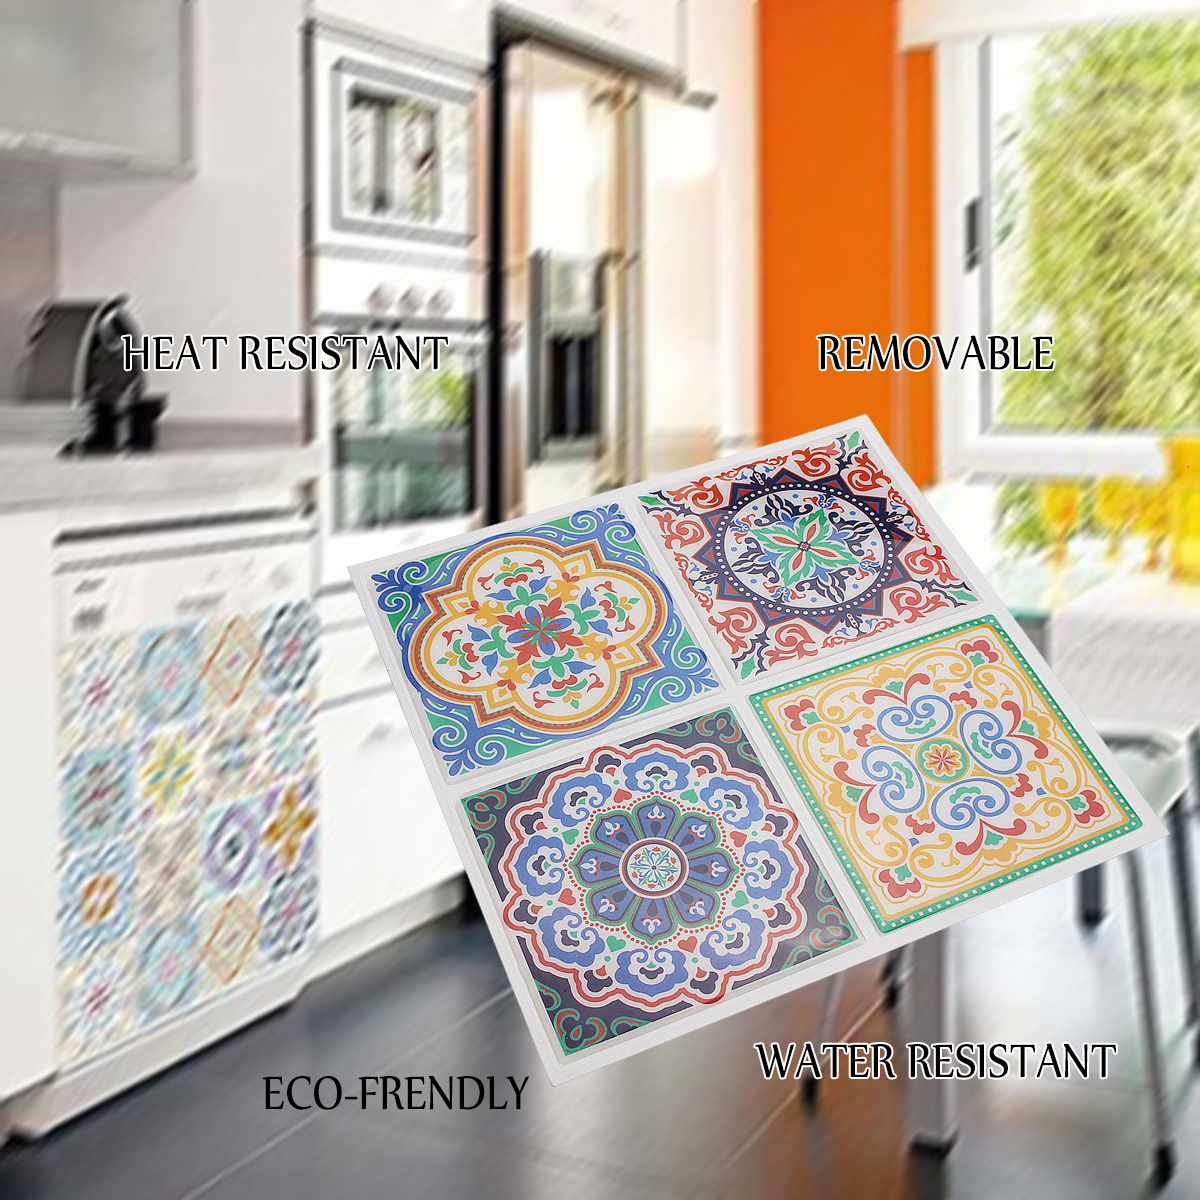 Wall-Tile-Sticker-Self-adhesive-PVC-Kitchen-Bathroom-Floor-Home-Decoration-10quotx10quot-1822260-3